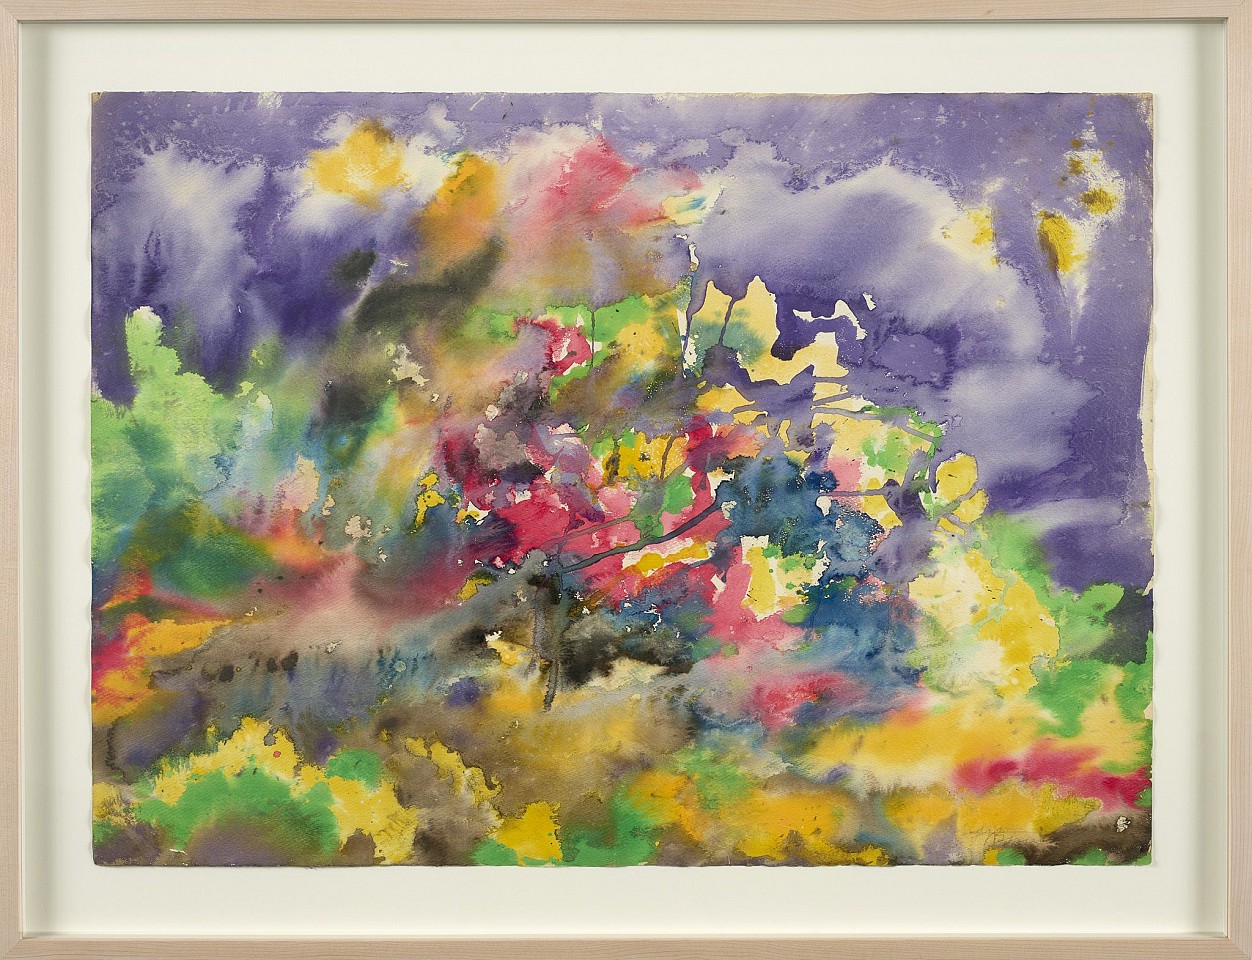 Frederick J. Brown, Untitled, 1970
Watercolor on paper, 21 3/4 x 29 3/4 in. (55.2 x 75.6 cm)
BROW-00072